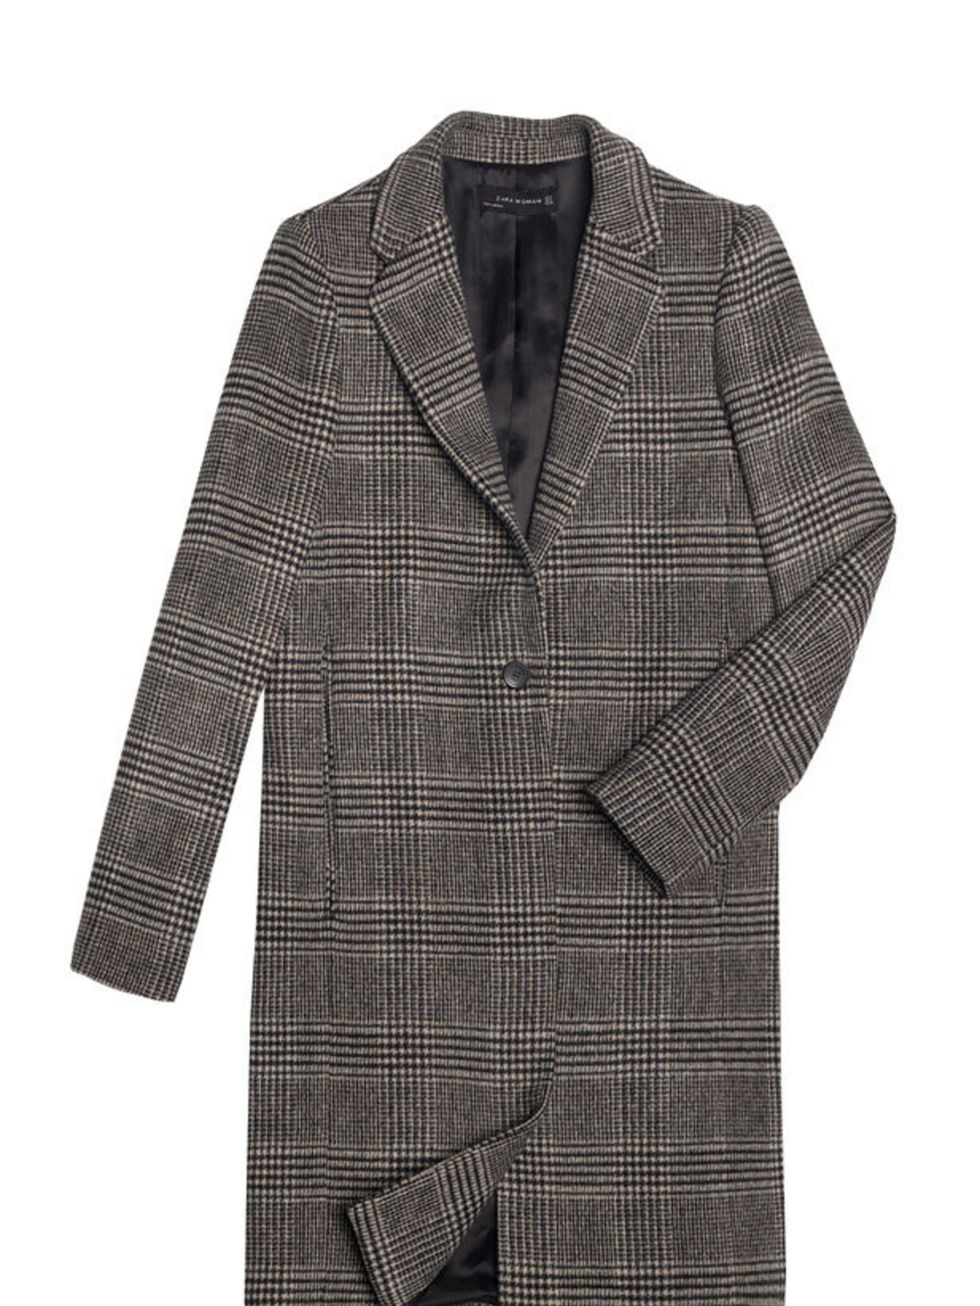 <p>The Prince of Wales check has always been a style classic but Yves Saint Laurents catwalk reinterpretation has given it a new lease of life. Get your heritage fix with this Zara coat <a href="http://www.zara.com/webapp/wcs/stores/servlet/product/uk/e